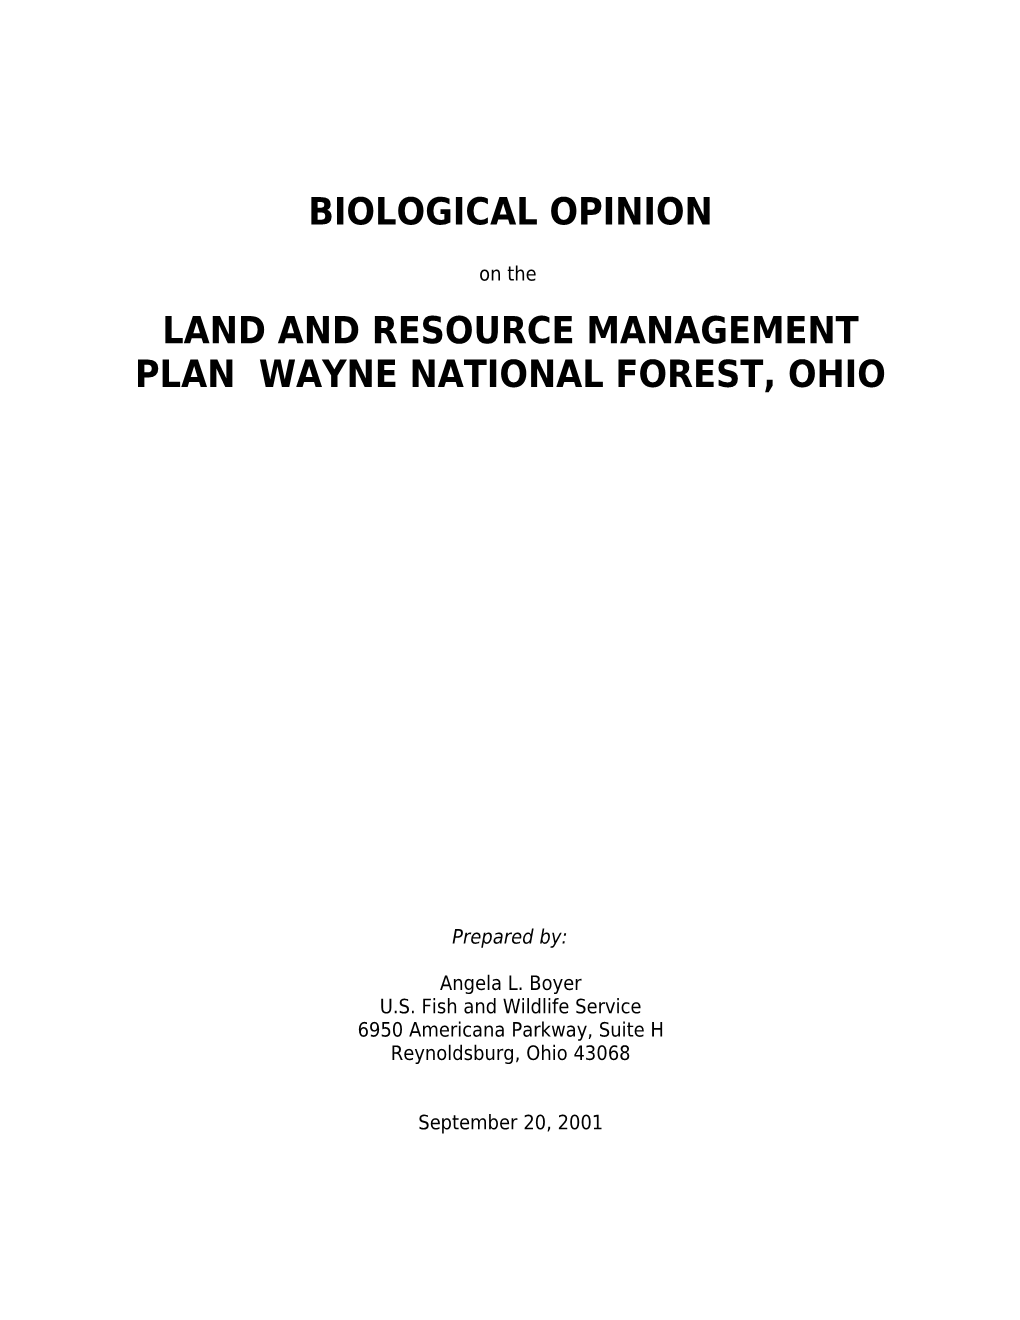 Land and Resource Management Plan Wayne National Forest, Ohio